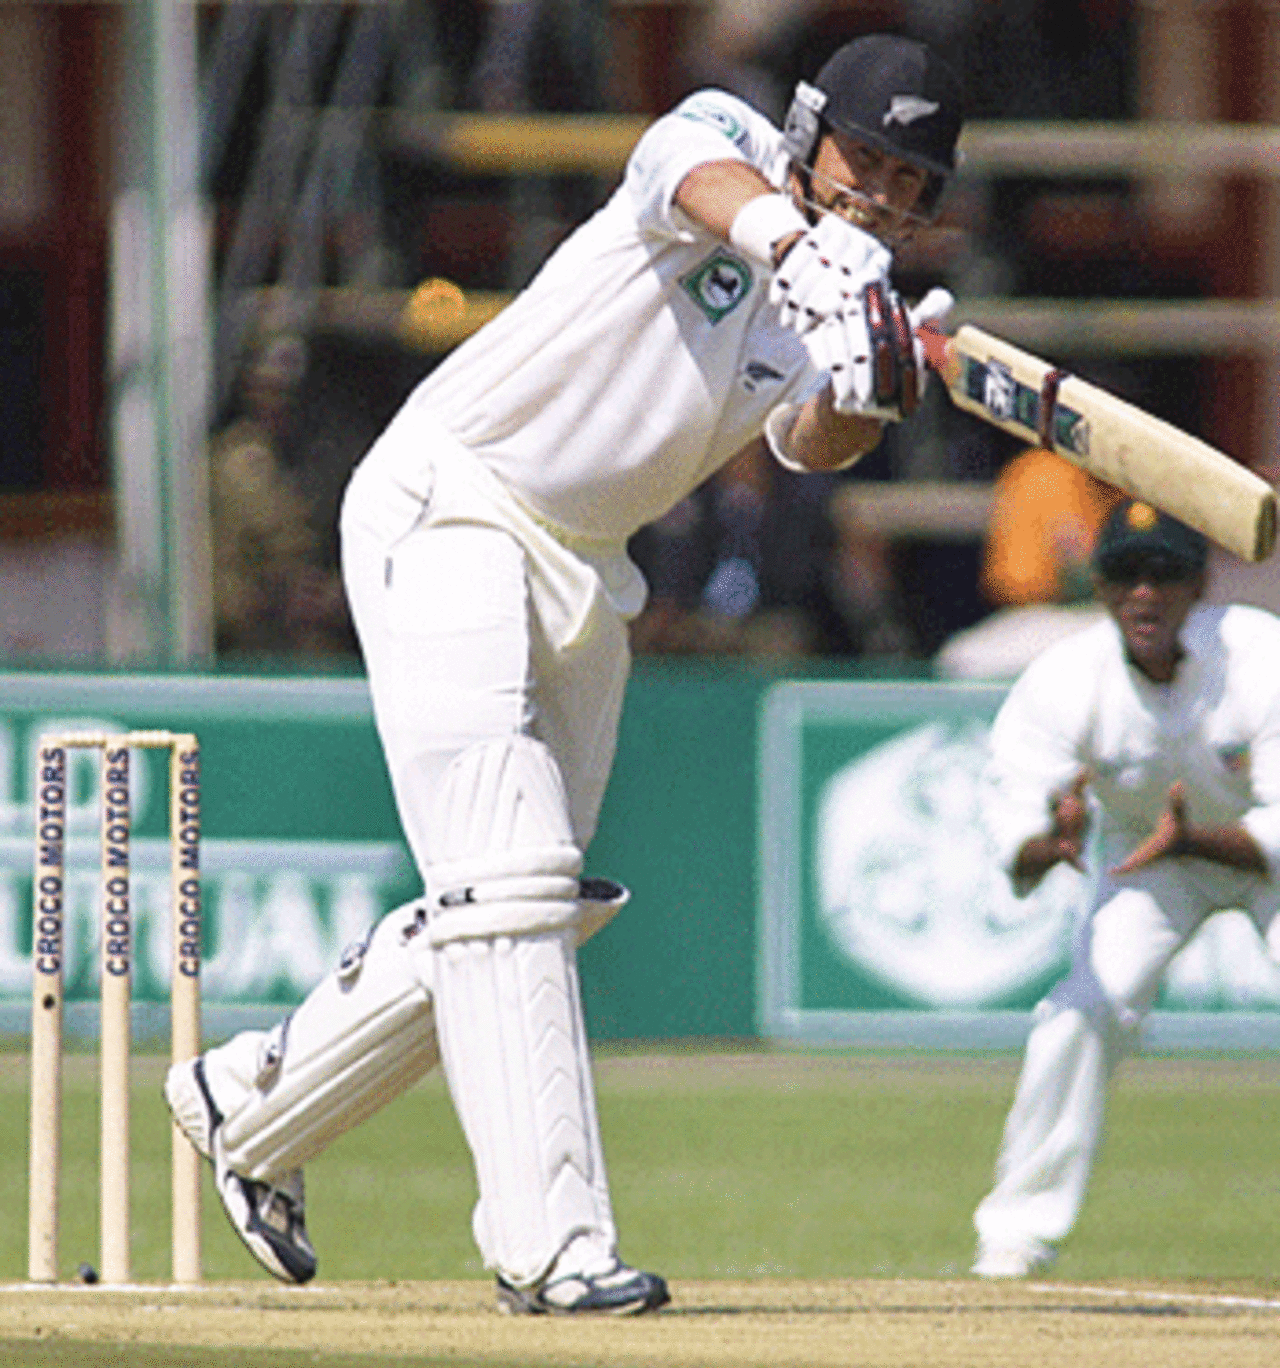 Stephen Fleming led New Zealand's recovery with a composed 73, Zimbabwe v New Zealand, 1st Test, Harare, August 7, 2005